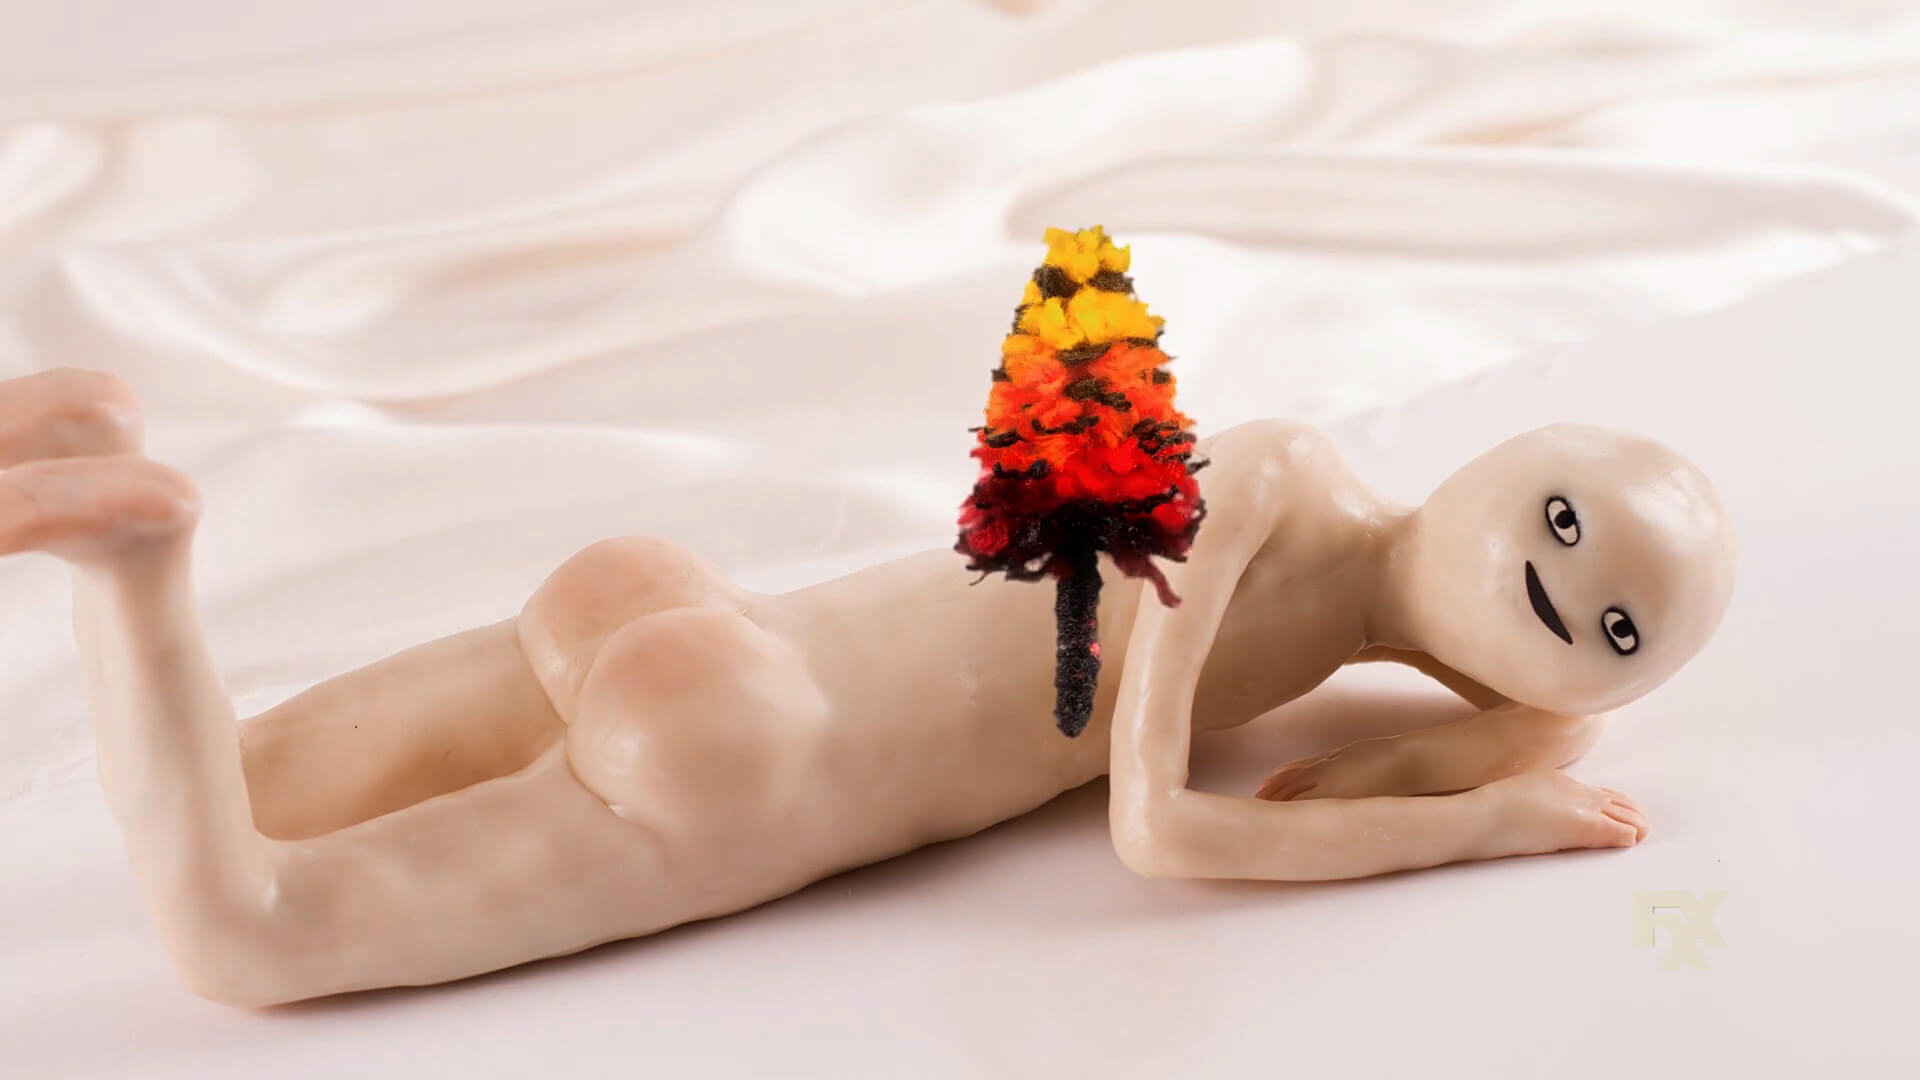 Viral video clip of naked humanoid with a bouquet of flowers